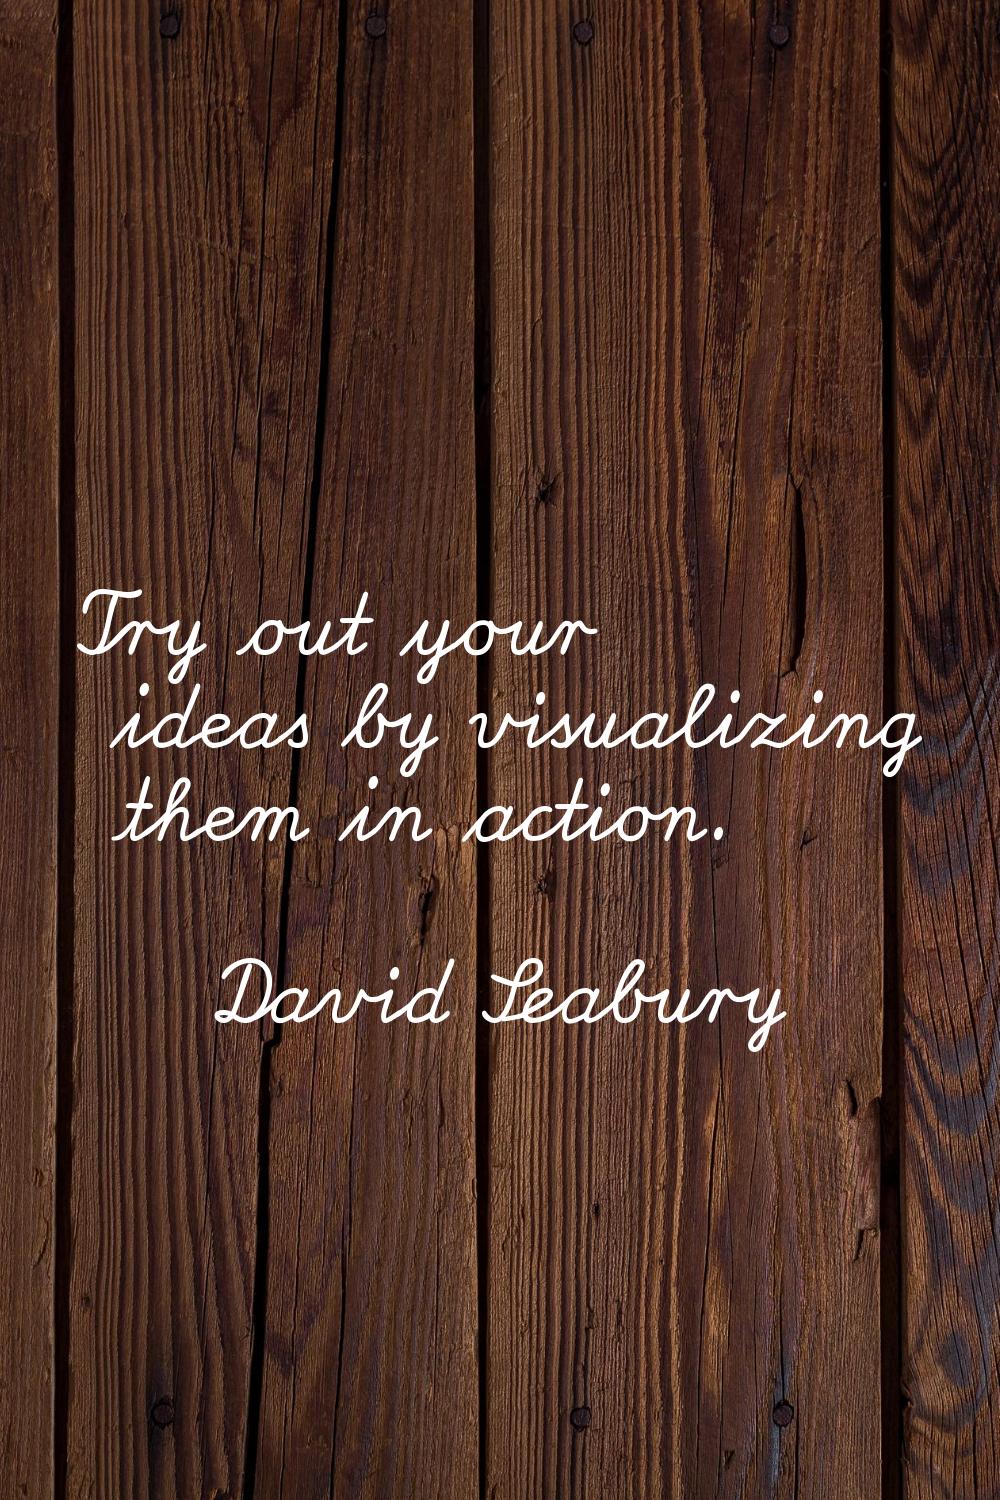 Try out your ideas by visualizing them in action.